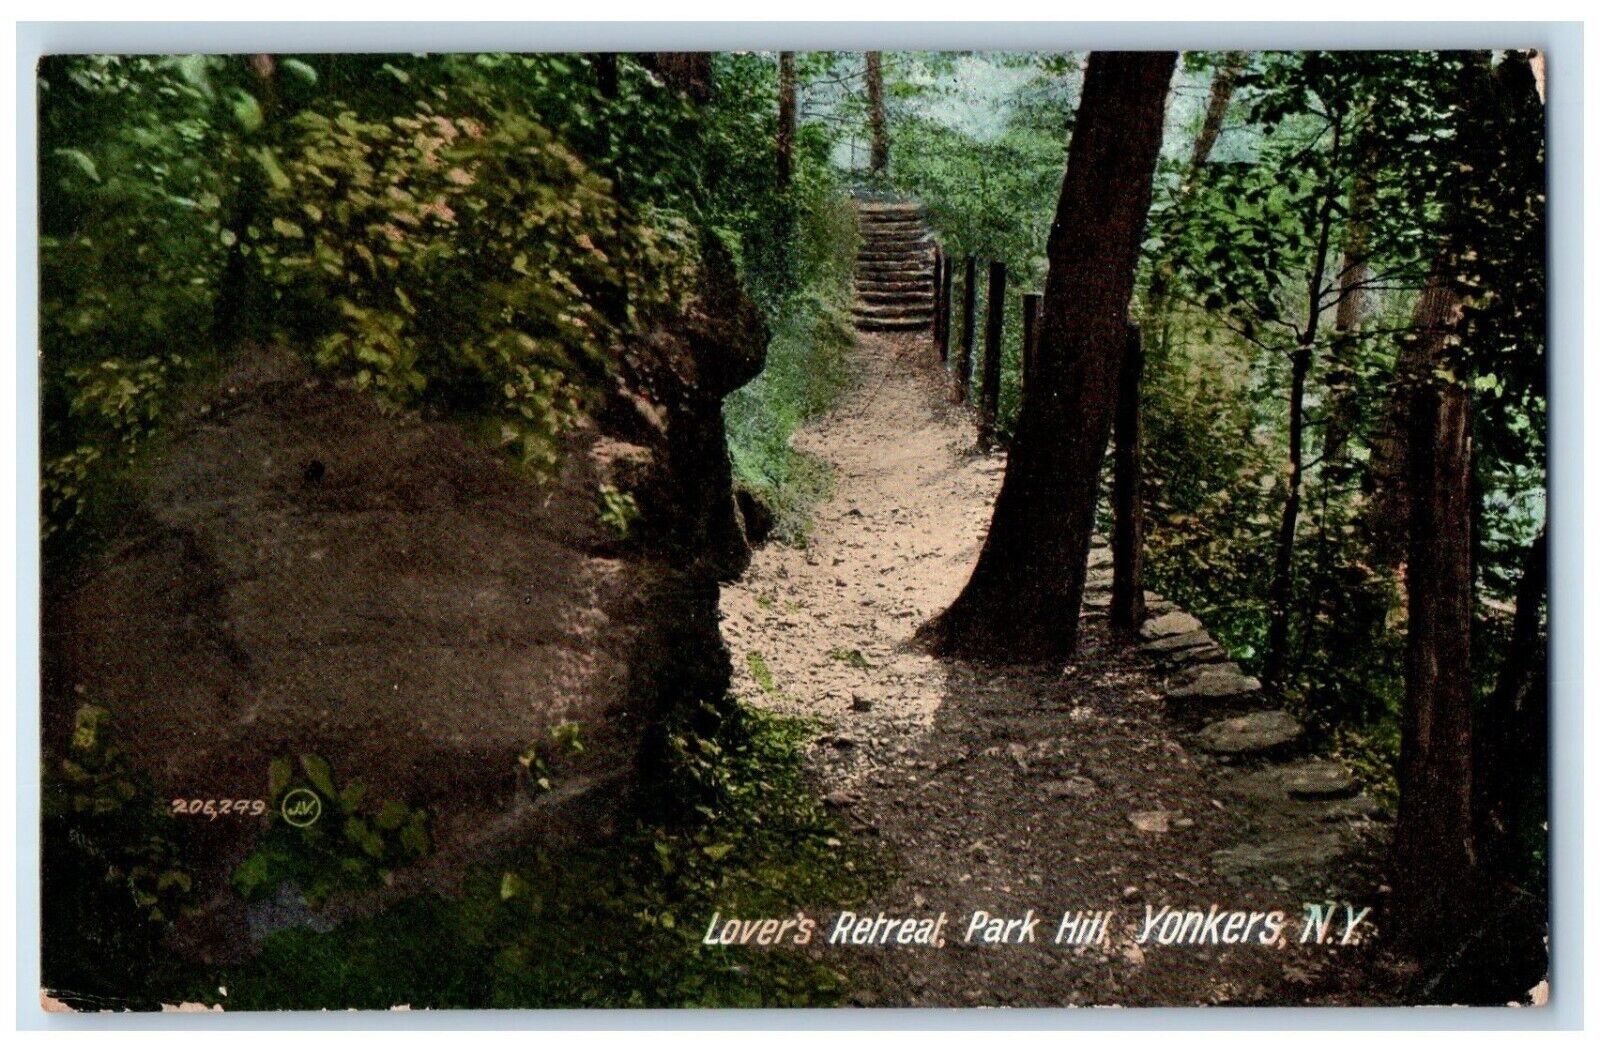 1913 Lover\'s Retreat Park Hill Trees Stairs Yonkers New York NY Vintage Postcard